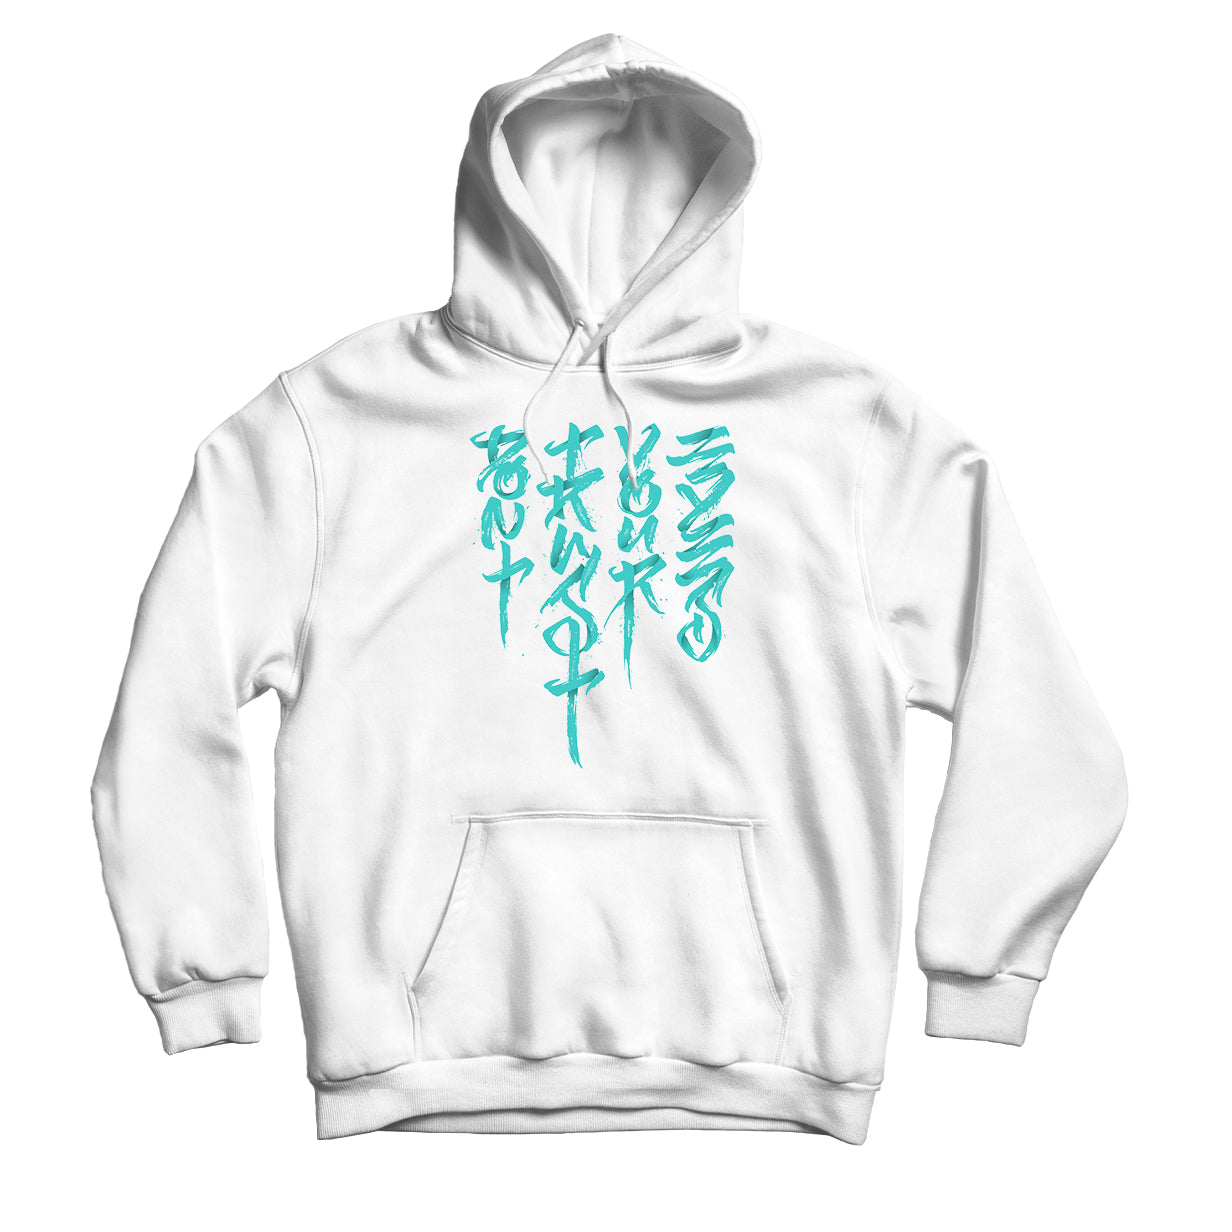 Don't Trust Your Eyes Pullover Hoodie - White/Black